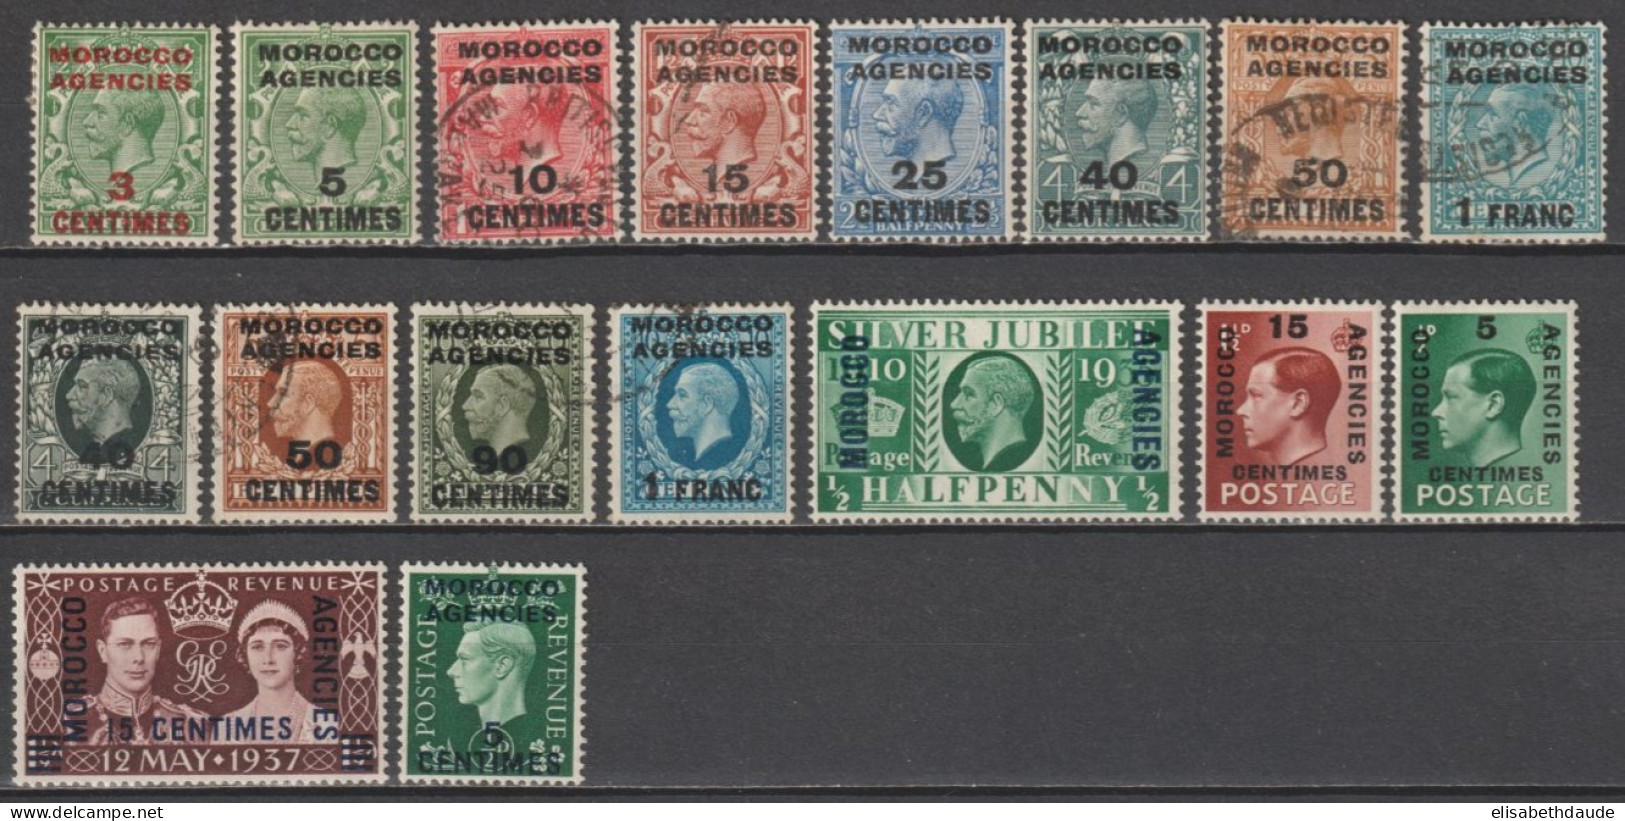 MAROC ANGLAIS ZONE FRANCAISE - PETITE COLLECTION * / OBLITERES - Morocco Agencies / Tangier (...-1958)